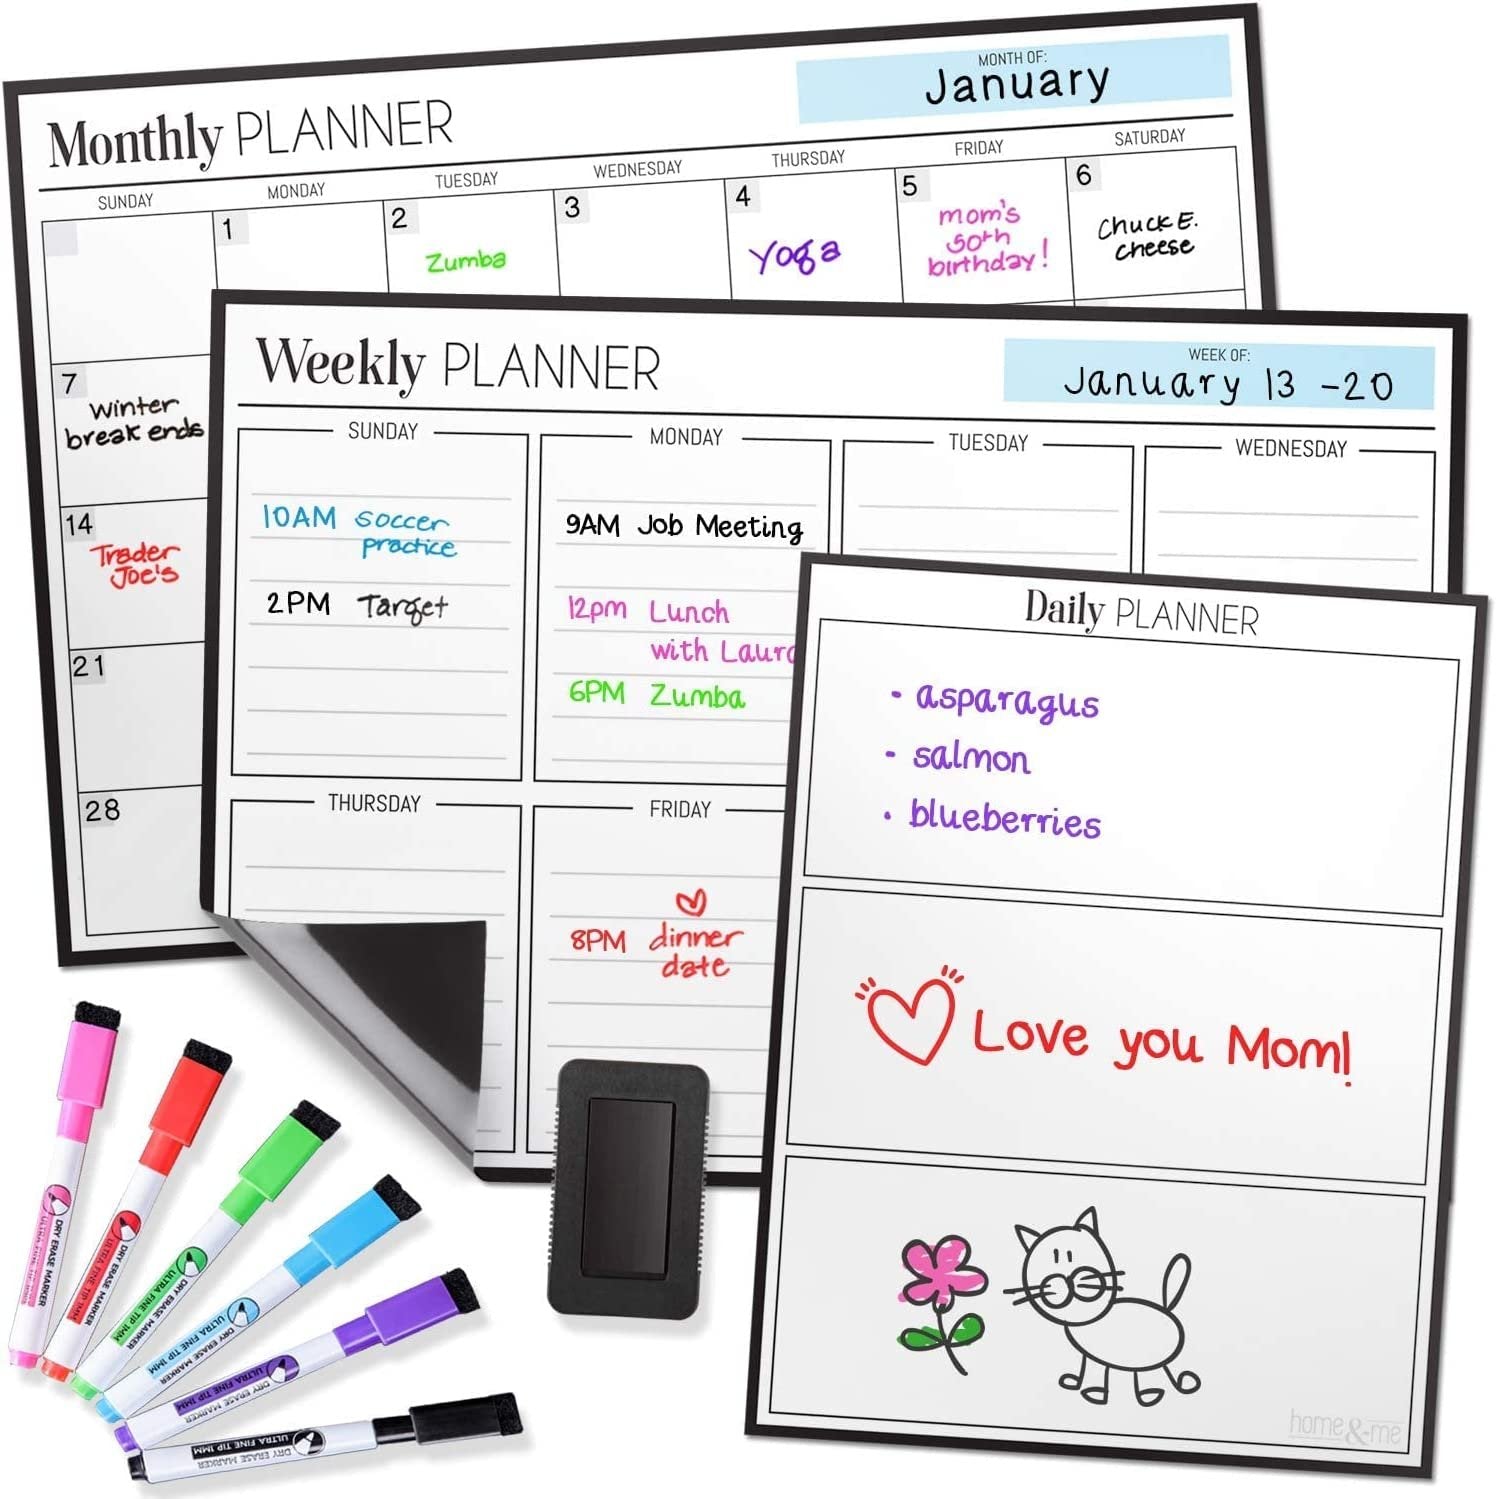 Magnetic Whiteboard Calendar Bundle for Fridge - Monthly, Weekly, Daily Planners | 3 Boards | 17x12 | 6 Markers & Large Eraser | White